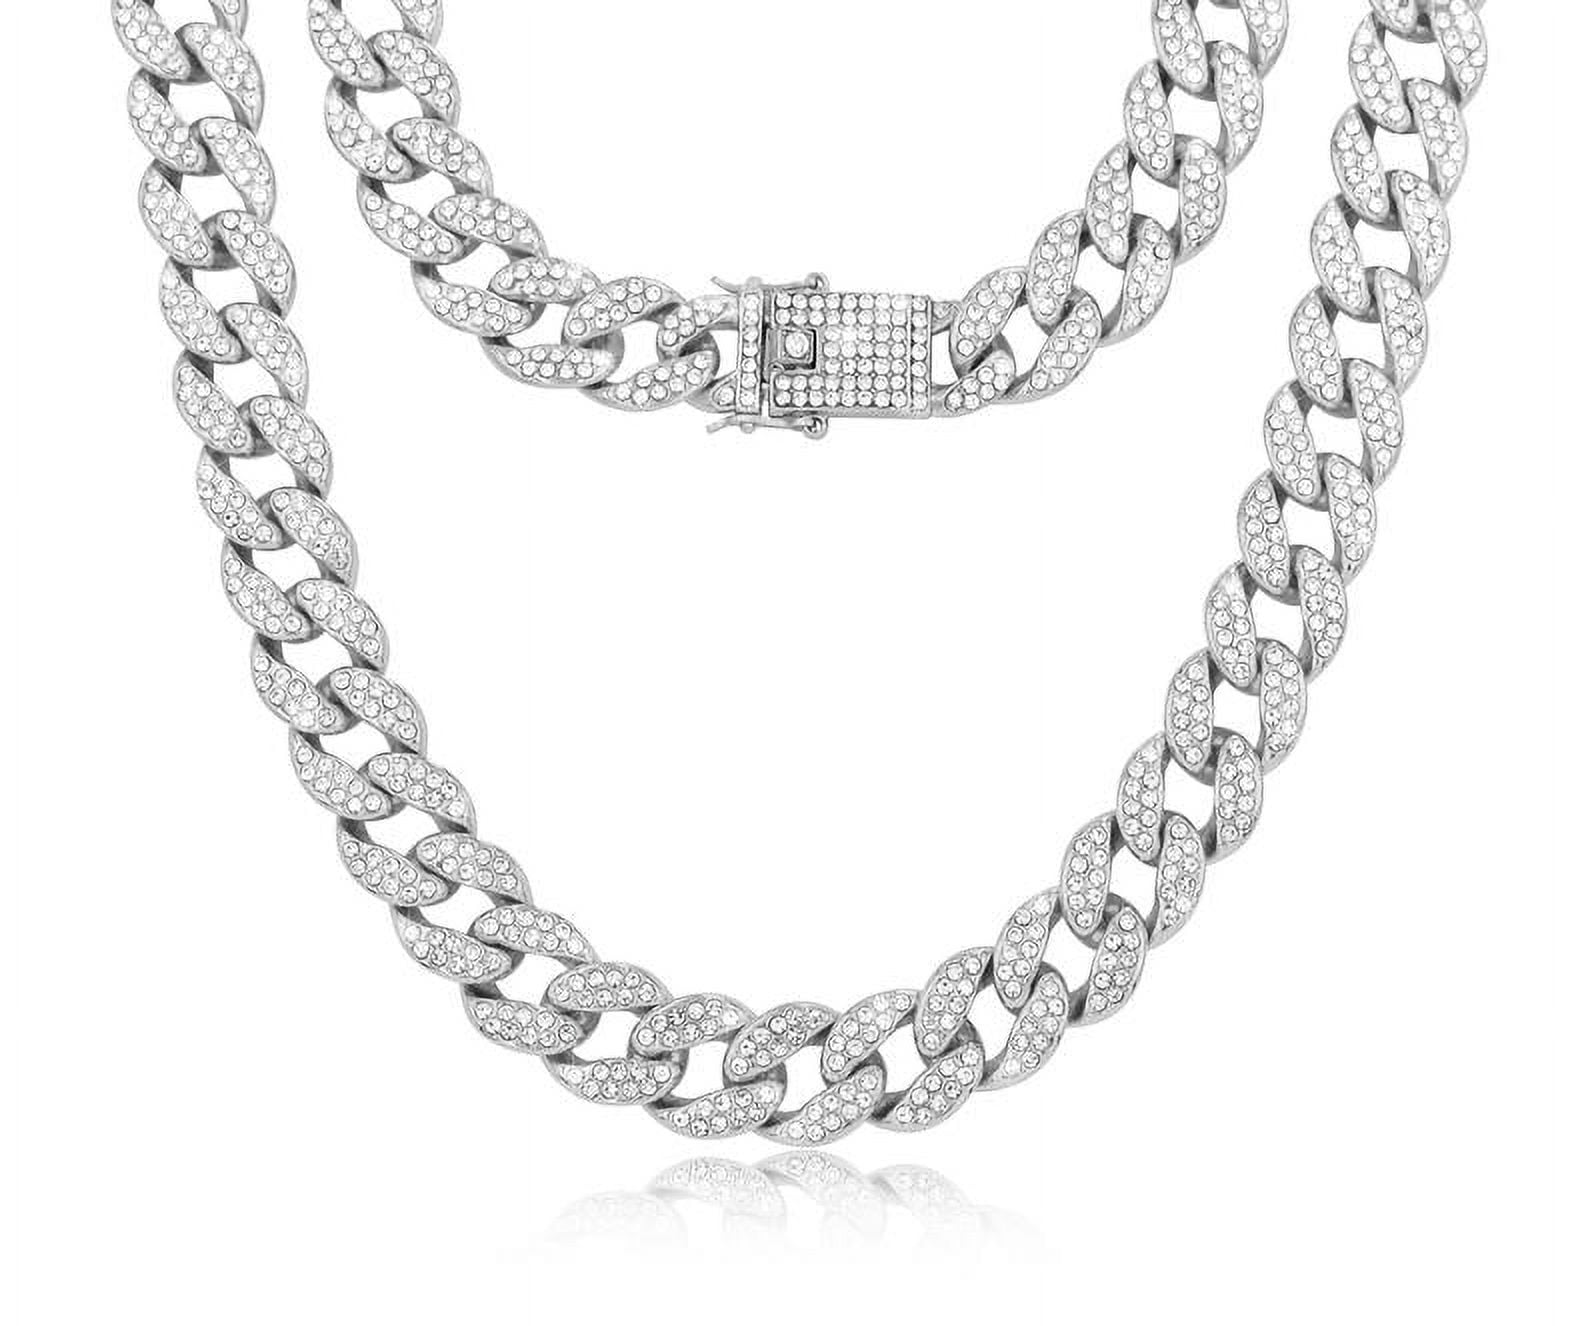 OLVLUS 18mm Iced Out Cuban Link Chain 18K White Gold Plated Bling 5A+ Cubic  Zirconia Diamond Chain Rapper Hip Hop Thick Cuban Link Necklace Luxury